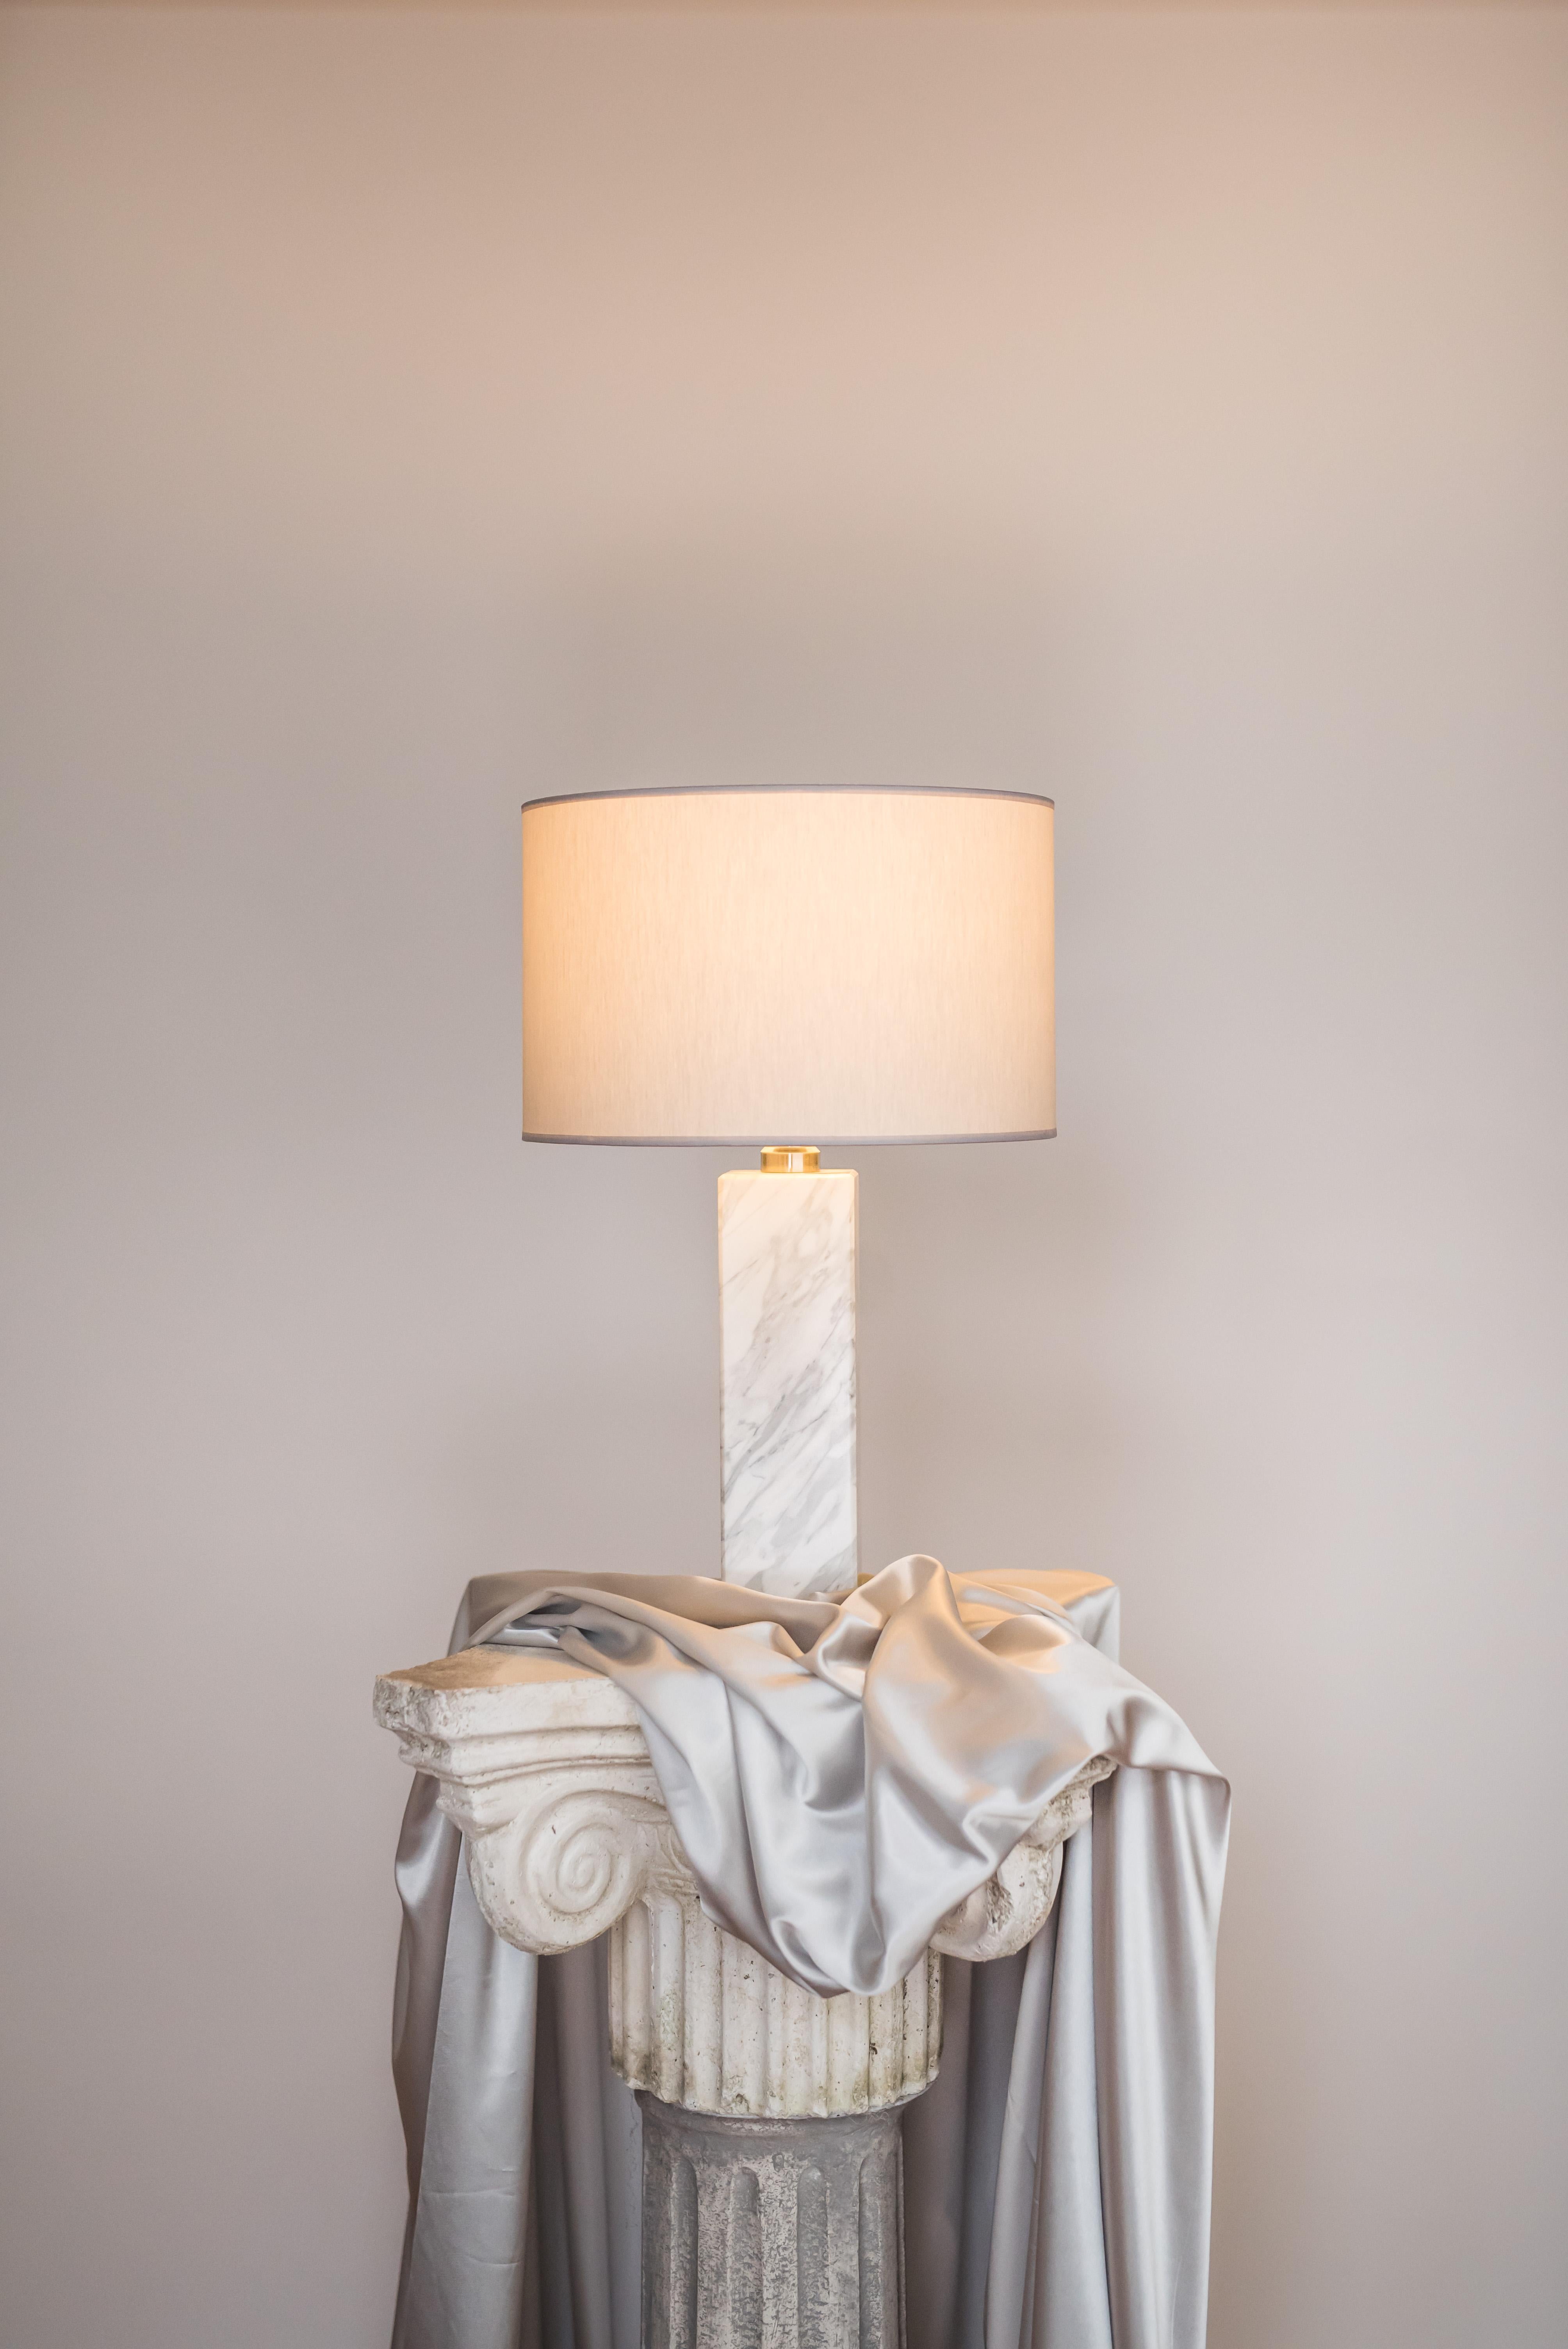 Brass sculpted table lamp by Brajak Vitberg
ATHENS 1.2
Mura marble (also available with Carrara marble)
Polished brass
Dimensions: 52 x 35 x 35 cm
white or black cotton lampshade, cotton wiring


Bijelic and Brajak are two architects from